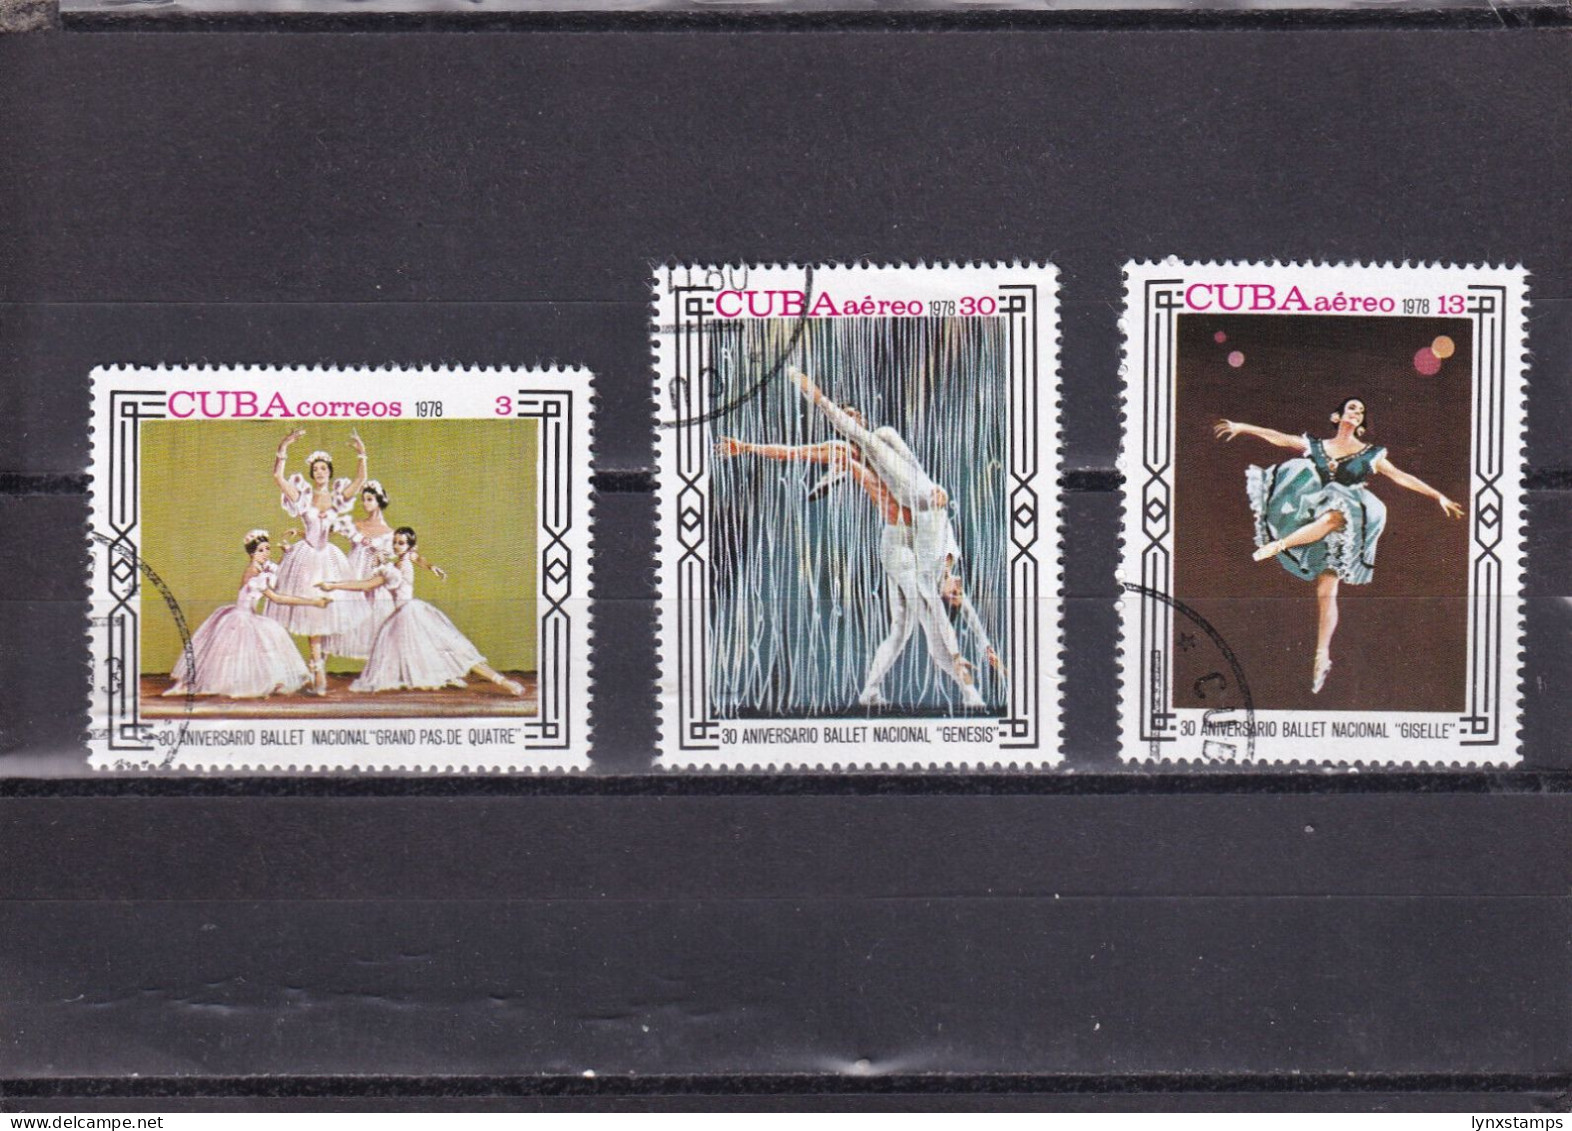 LI03 SCuba 1978 The 30th Anniversary Of The National Ballet Company Used Stamps - Oblitérés